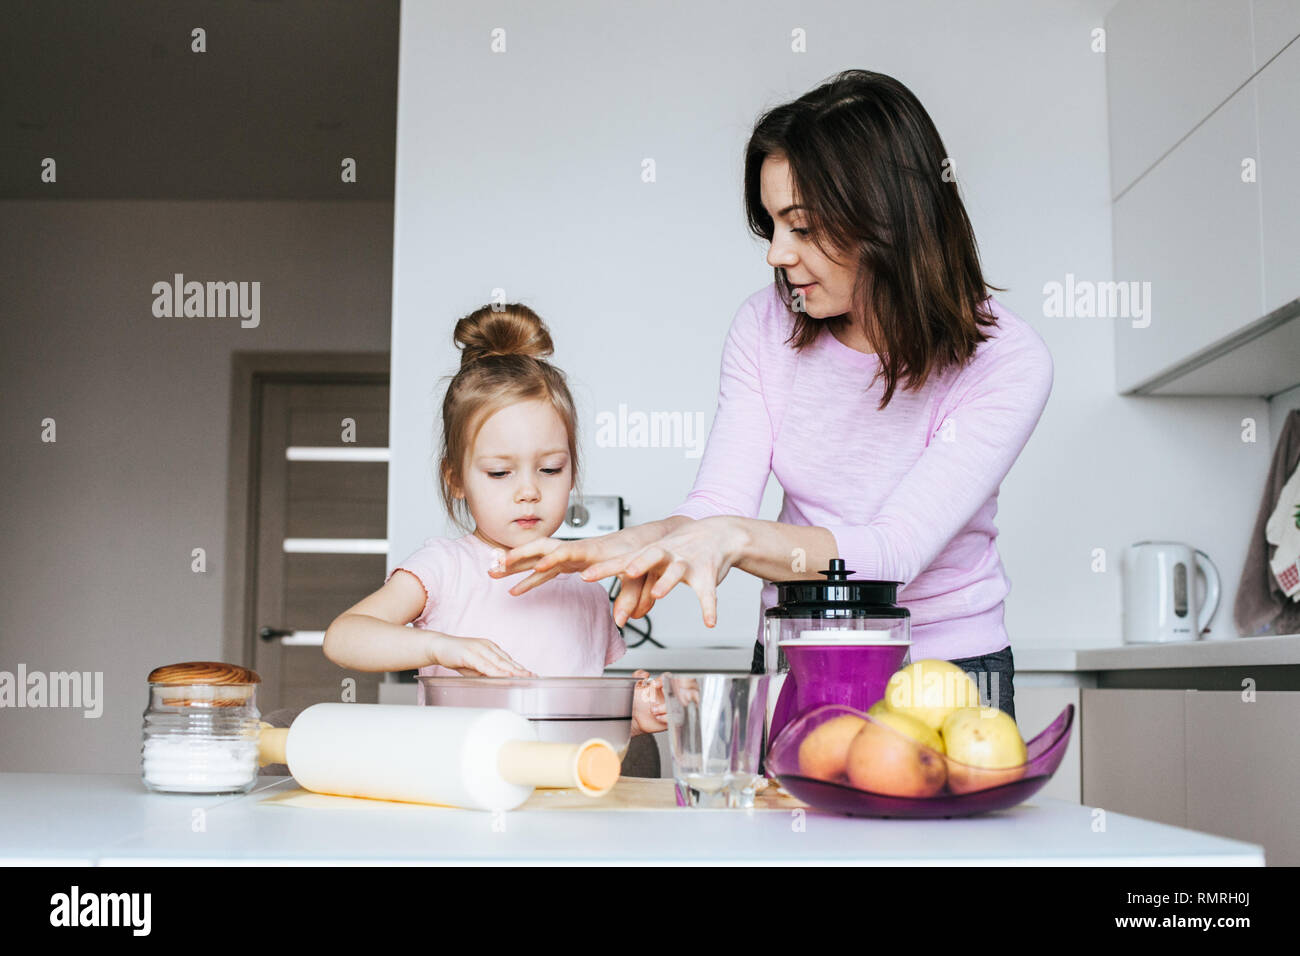 Portrait Of Adorable Little Girl And Her Mother Cooking Together Stock Photo